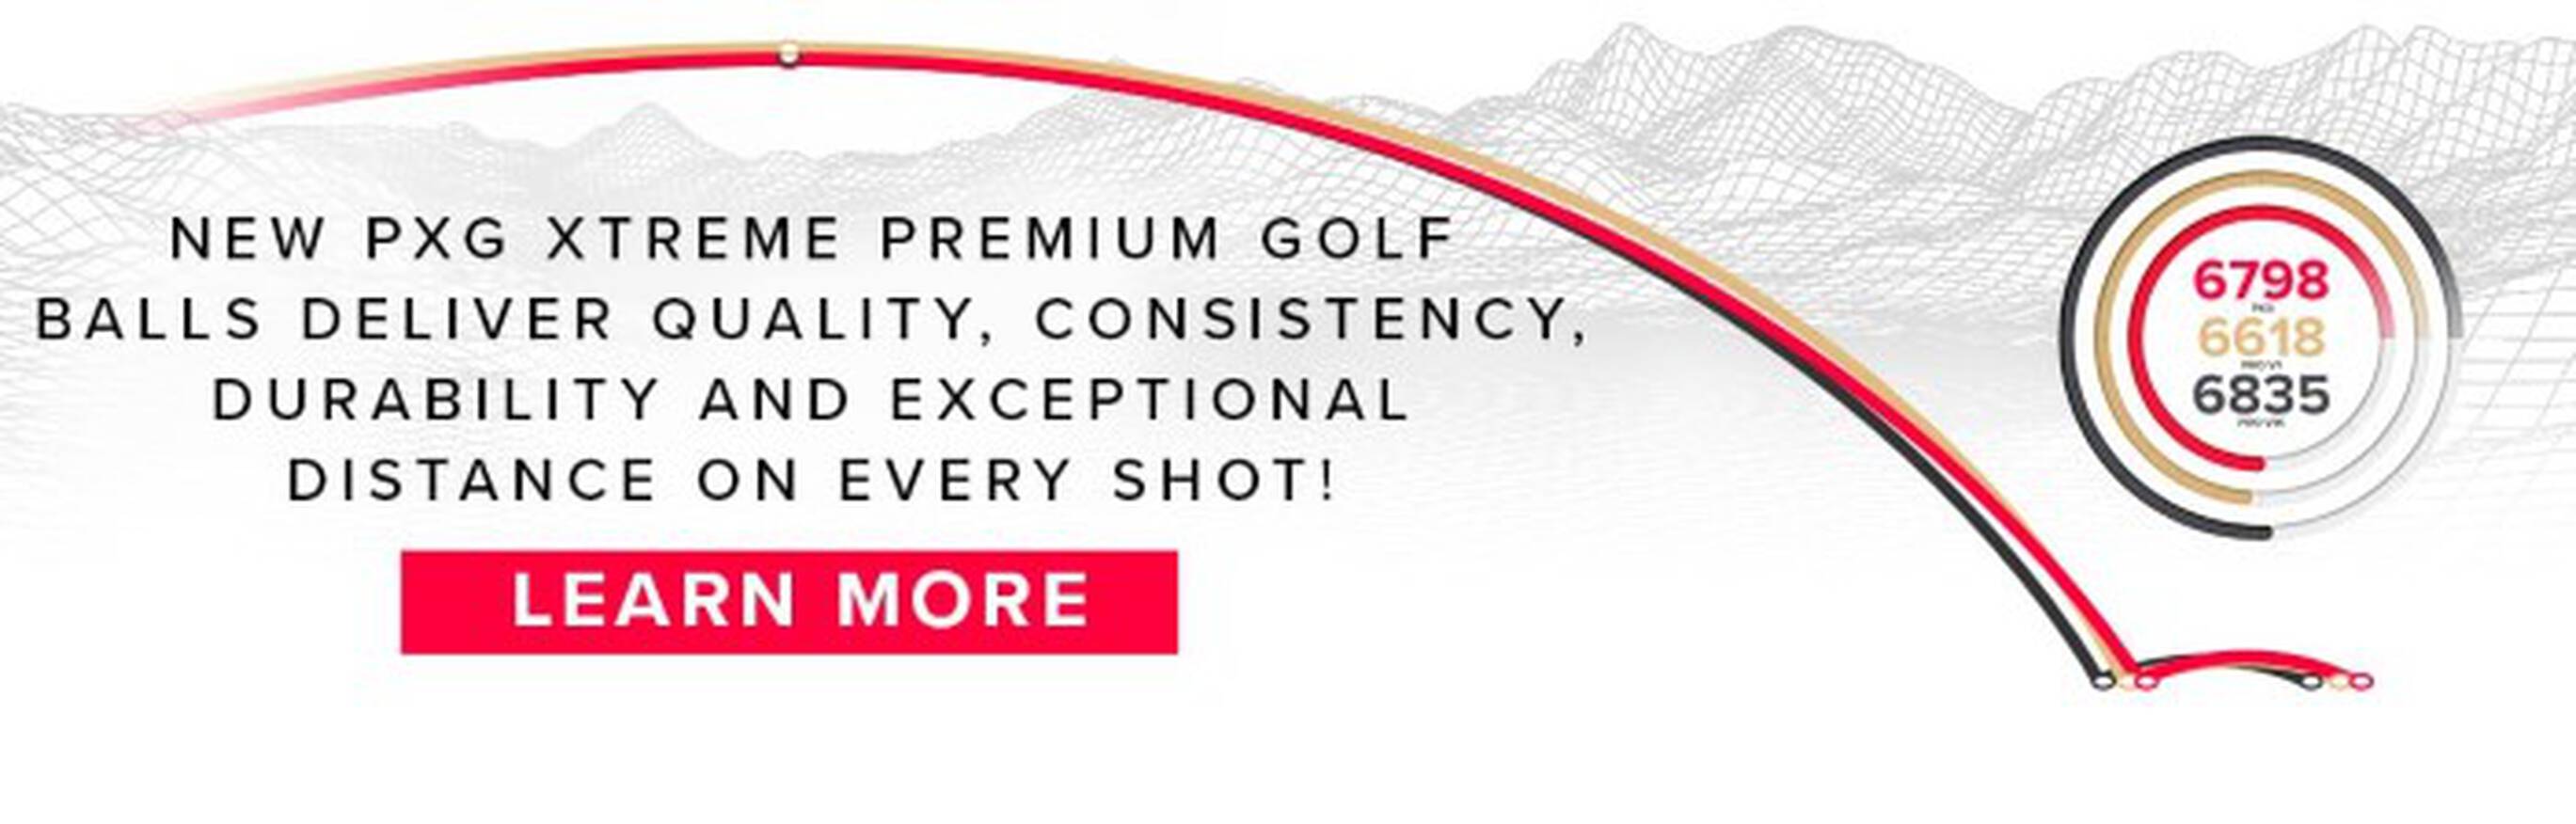 New PXG Xtreme Premium Golf Balls deliver exceptional performance on every shot!